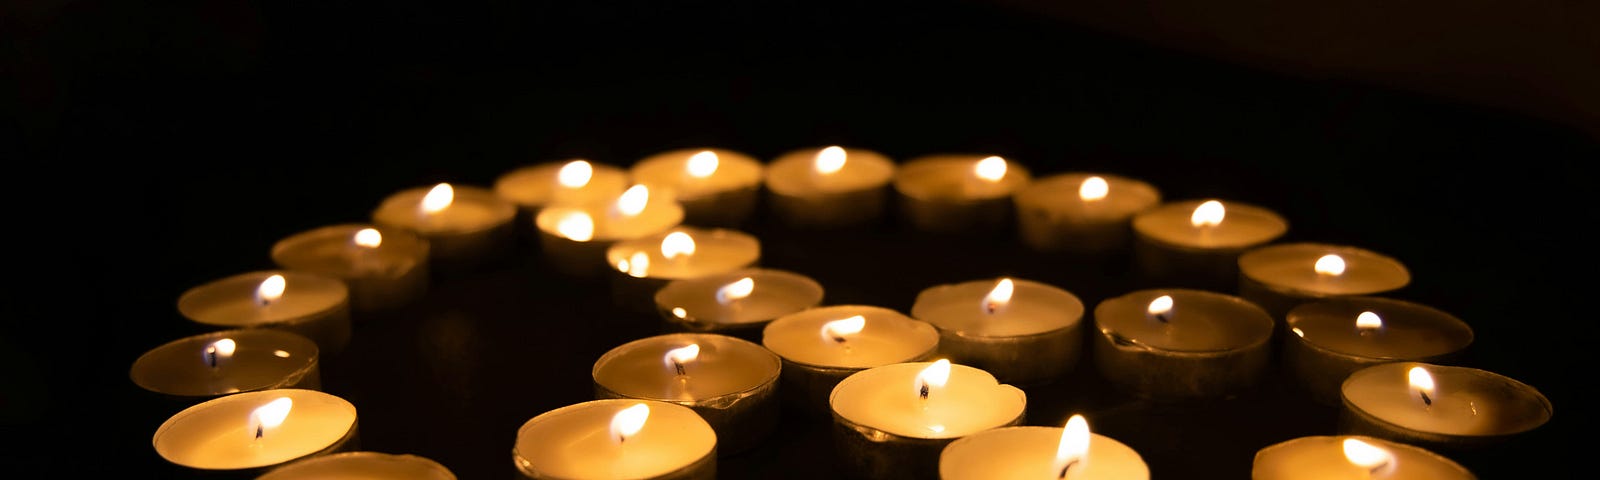 Several candles arranged to form the symbol of peace.